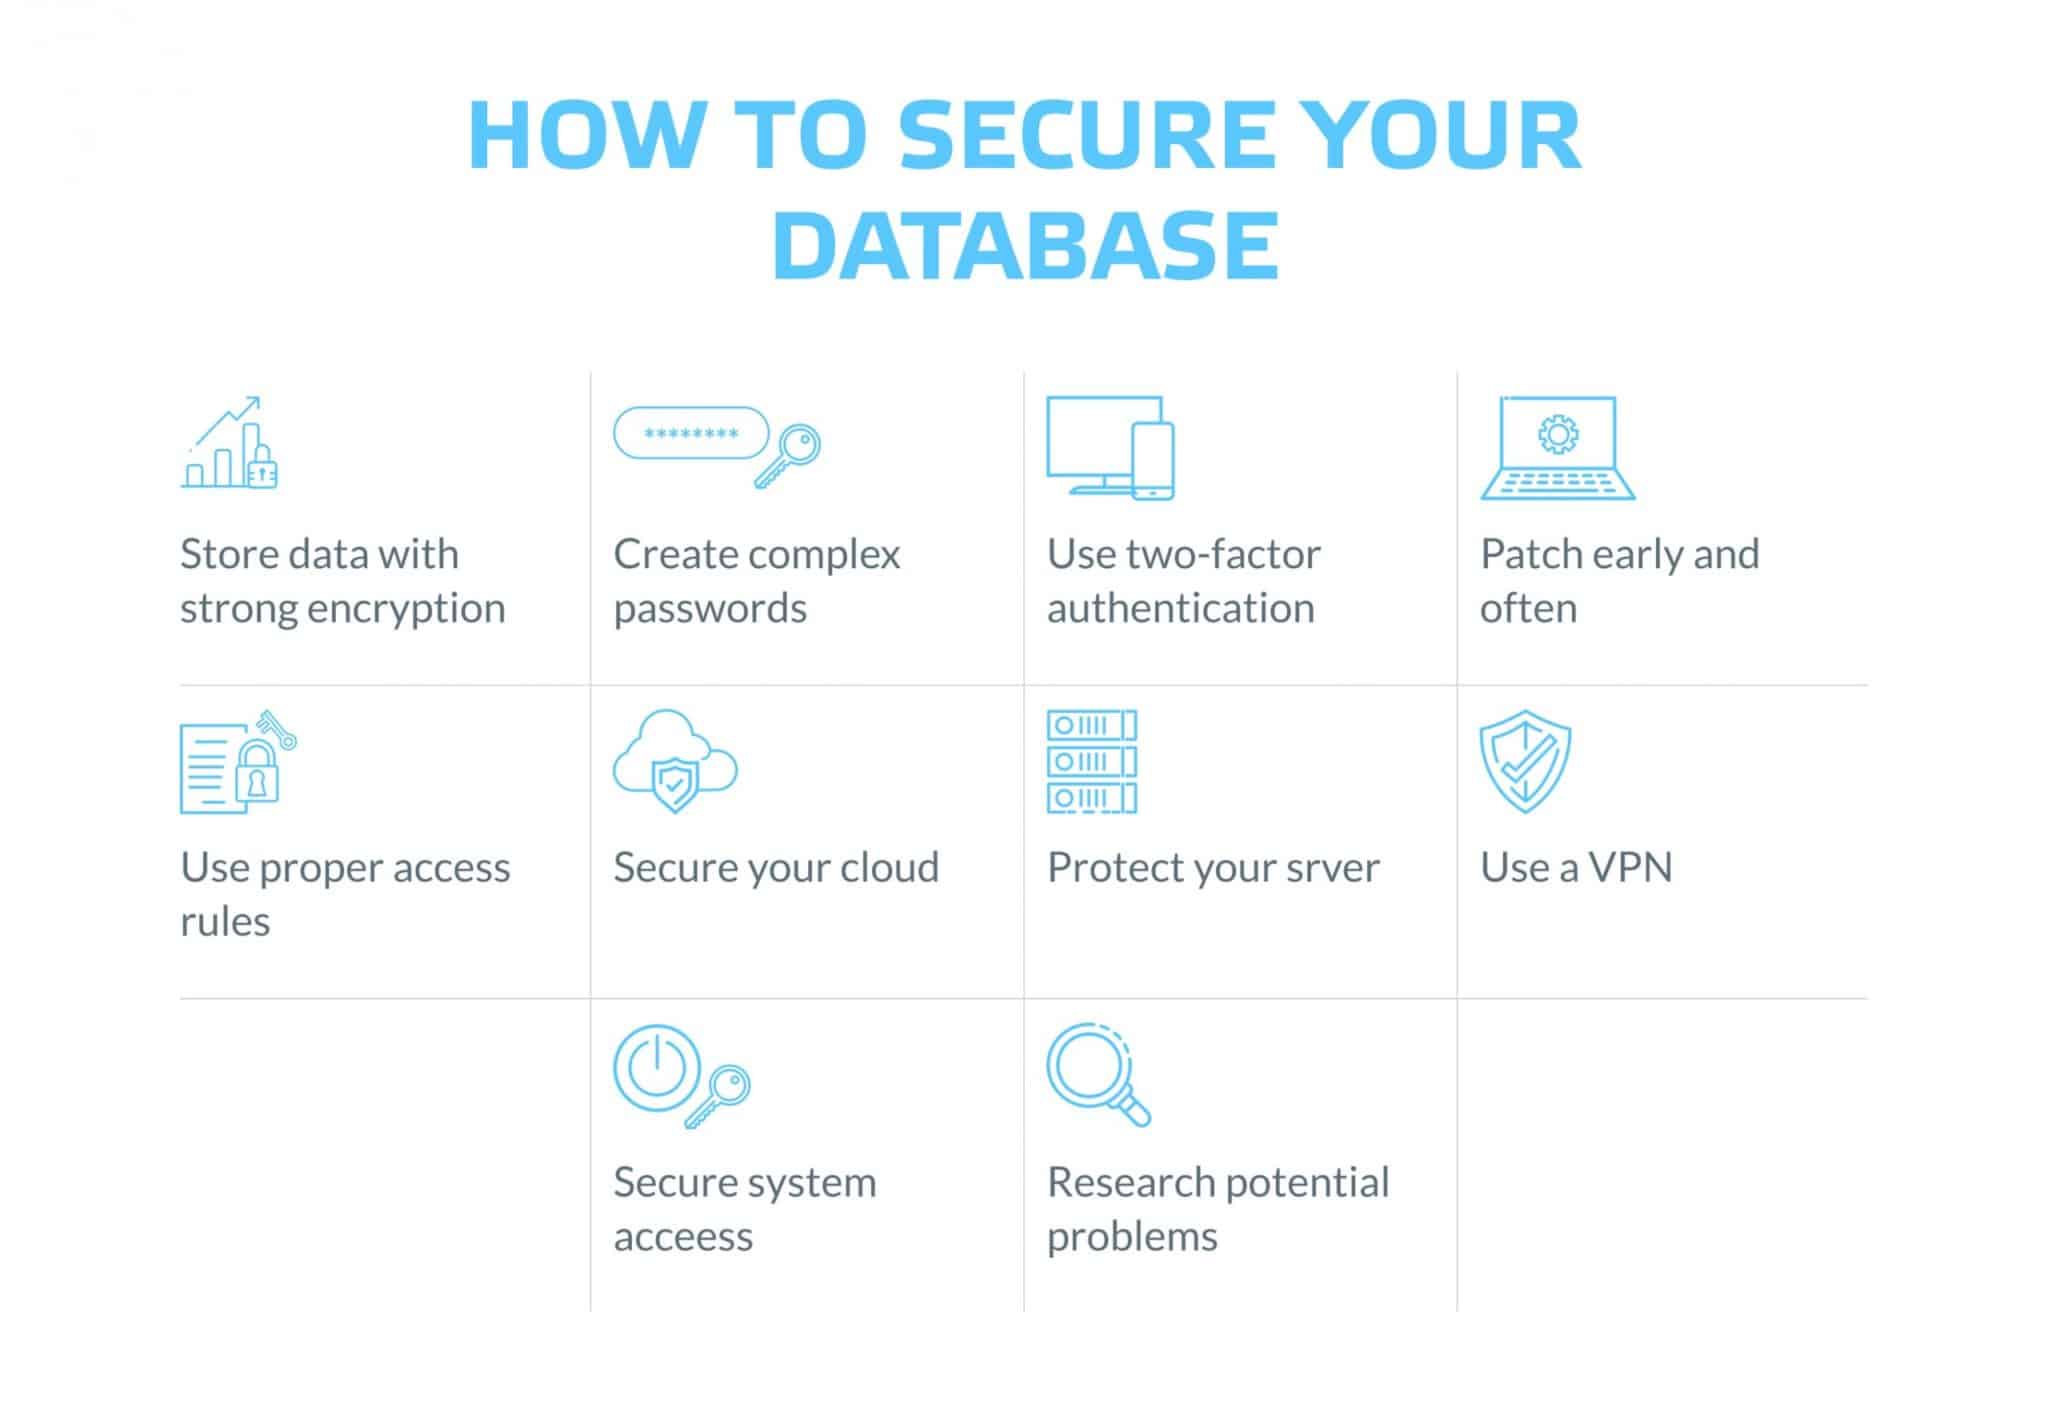 How to secure database?